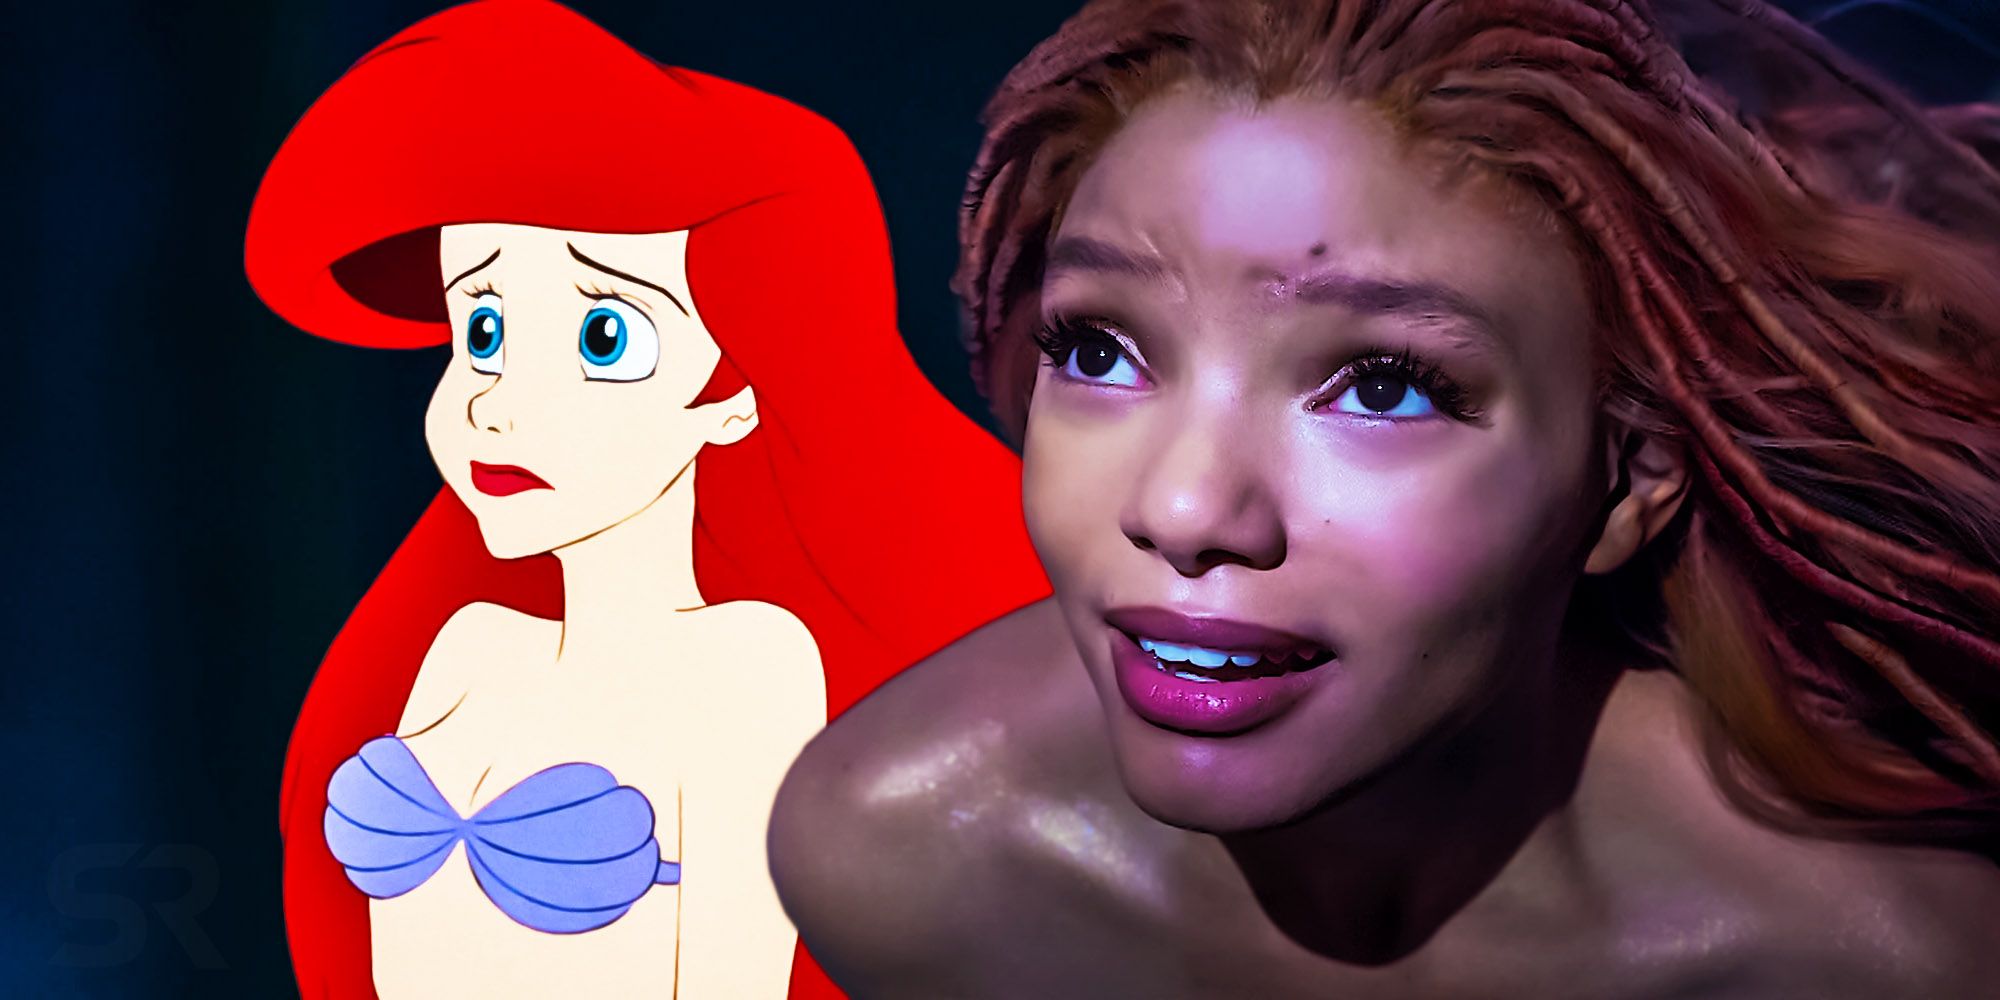 Disney's Live-Action Remake Continues A Major Little Mermaid Trend